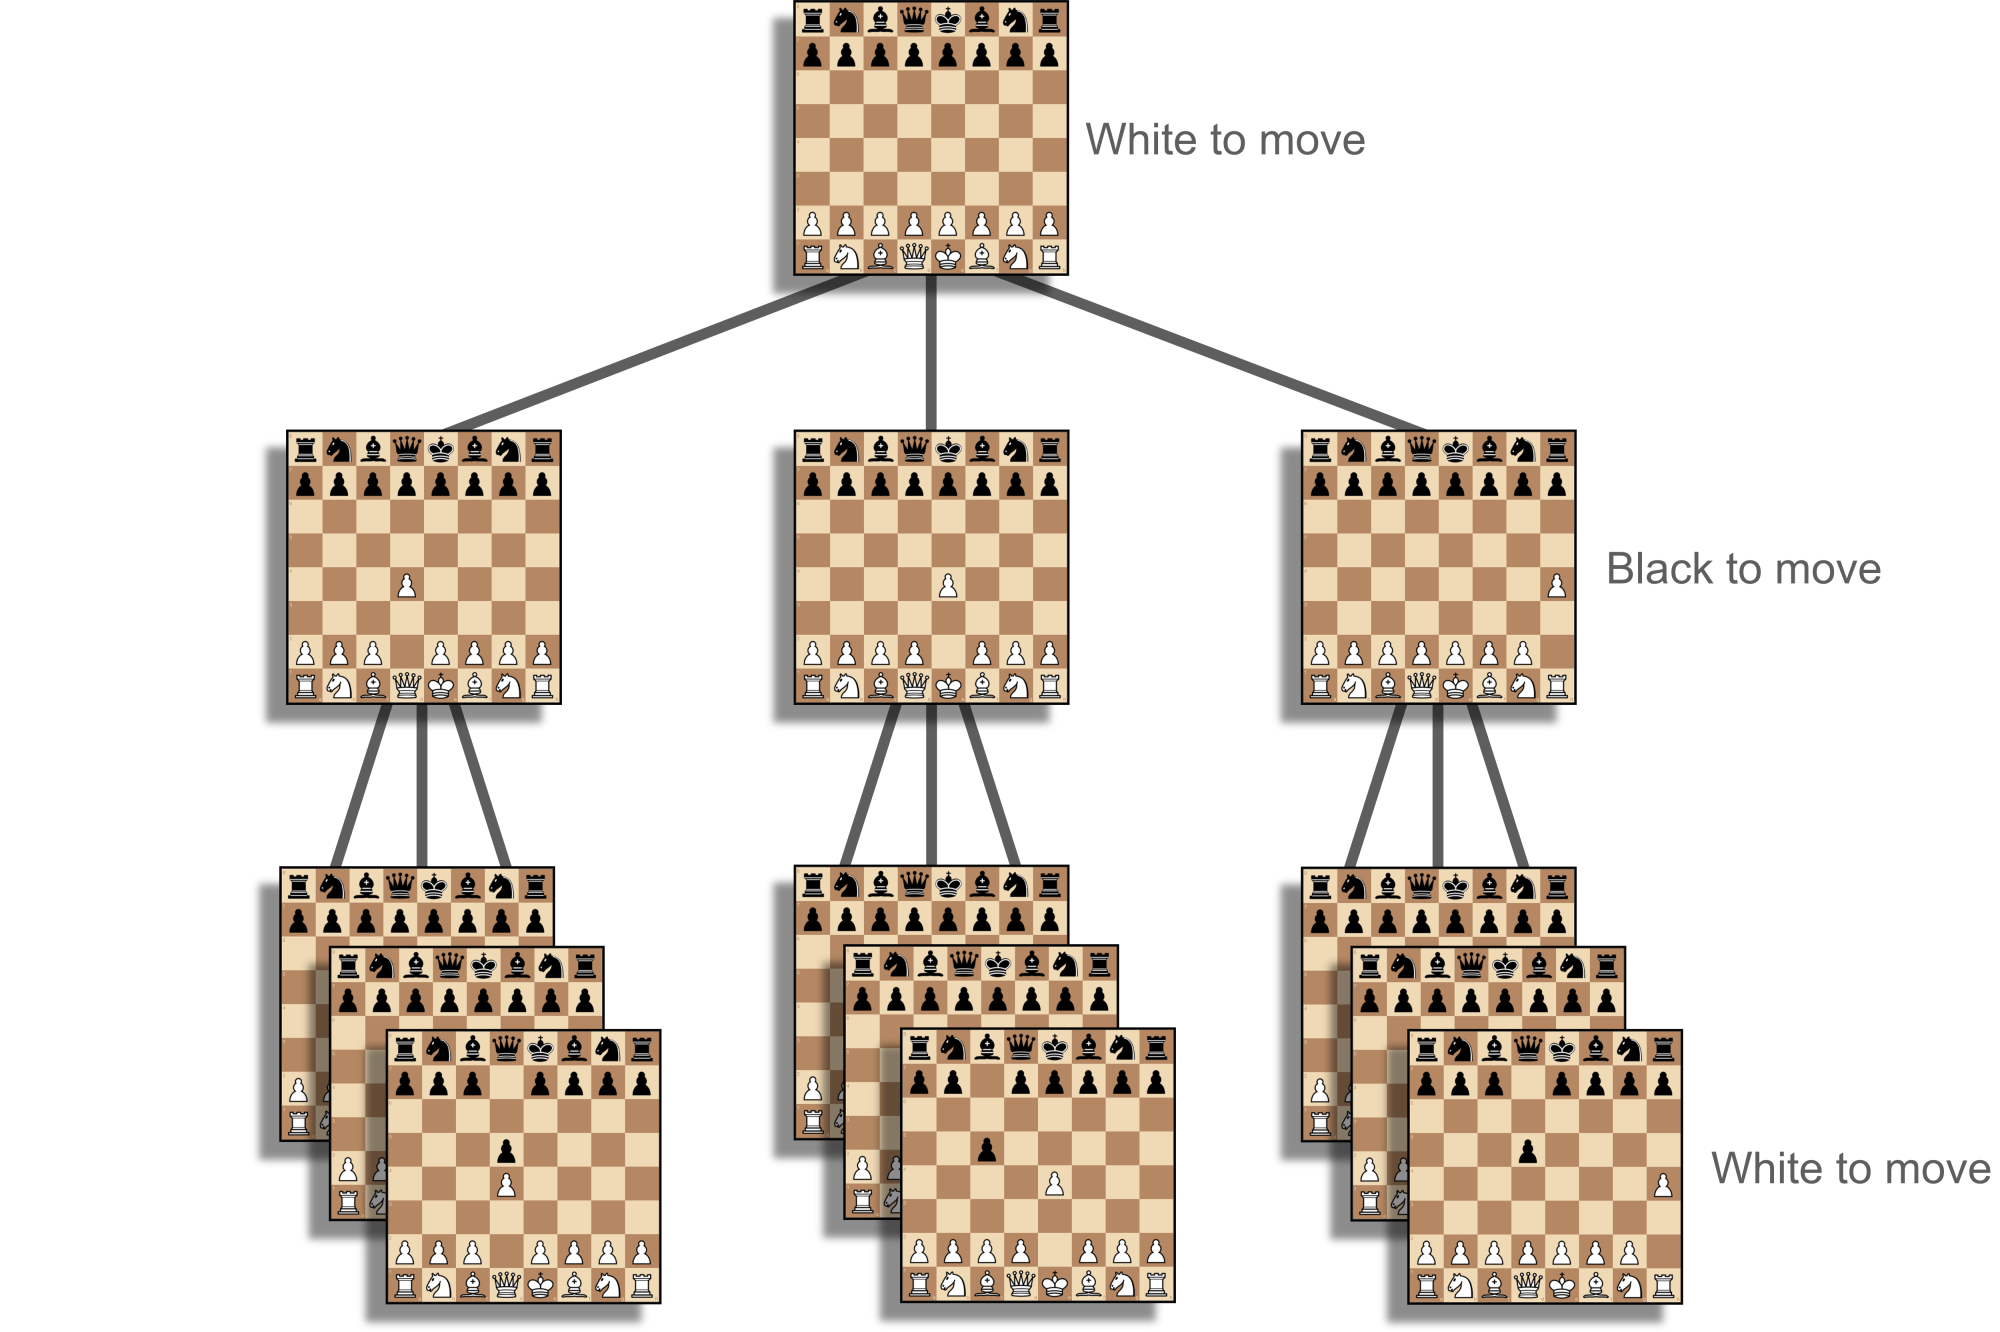 stockfish - How many moves out do the static board evaluations use